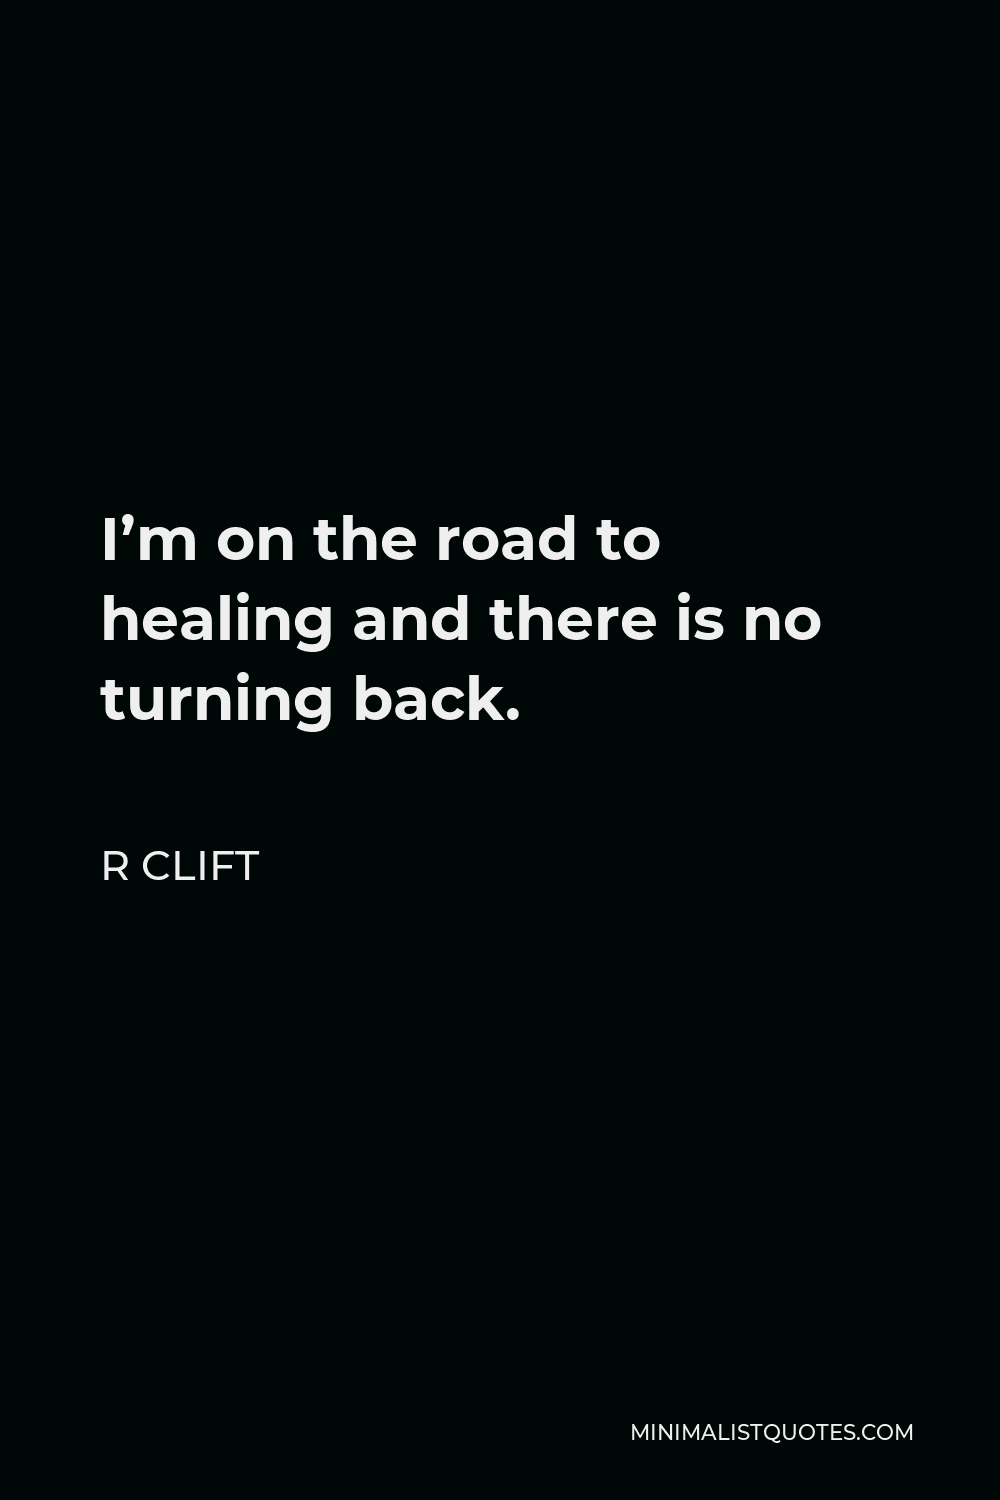 R Clift Quote - I’m on the road to healing and there is no turning back.